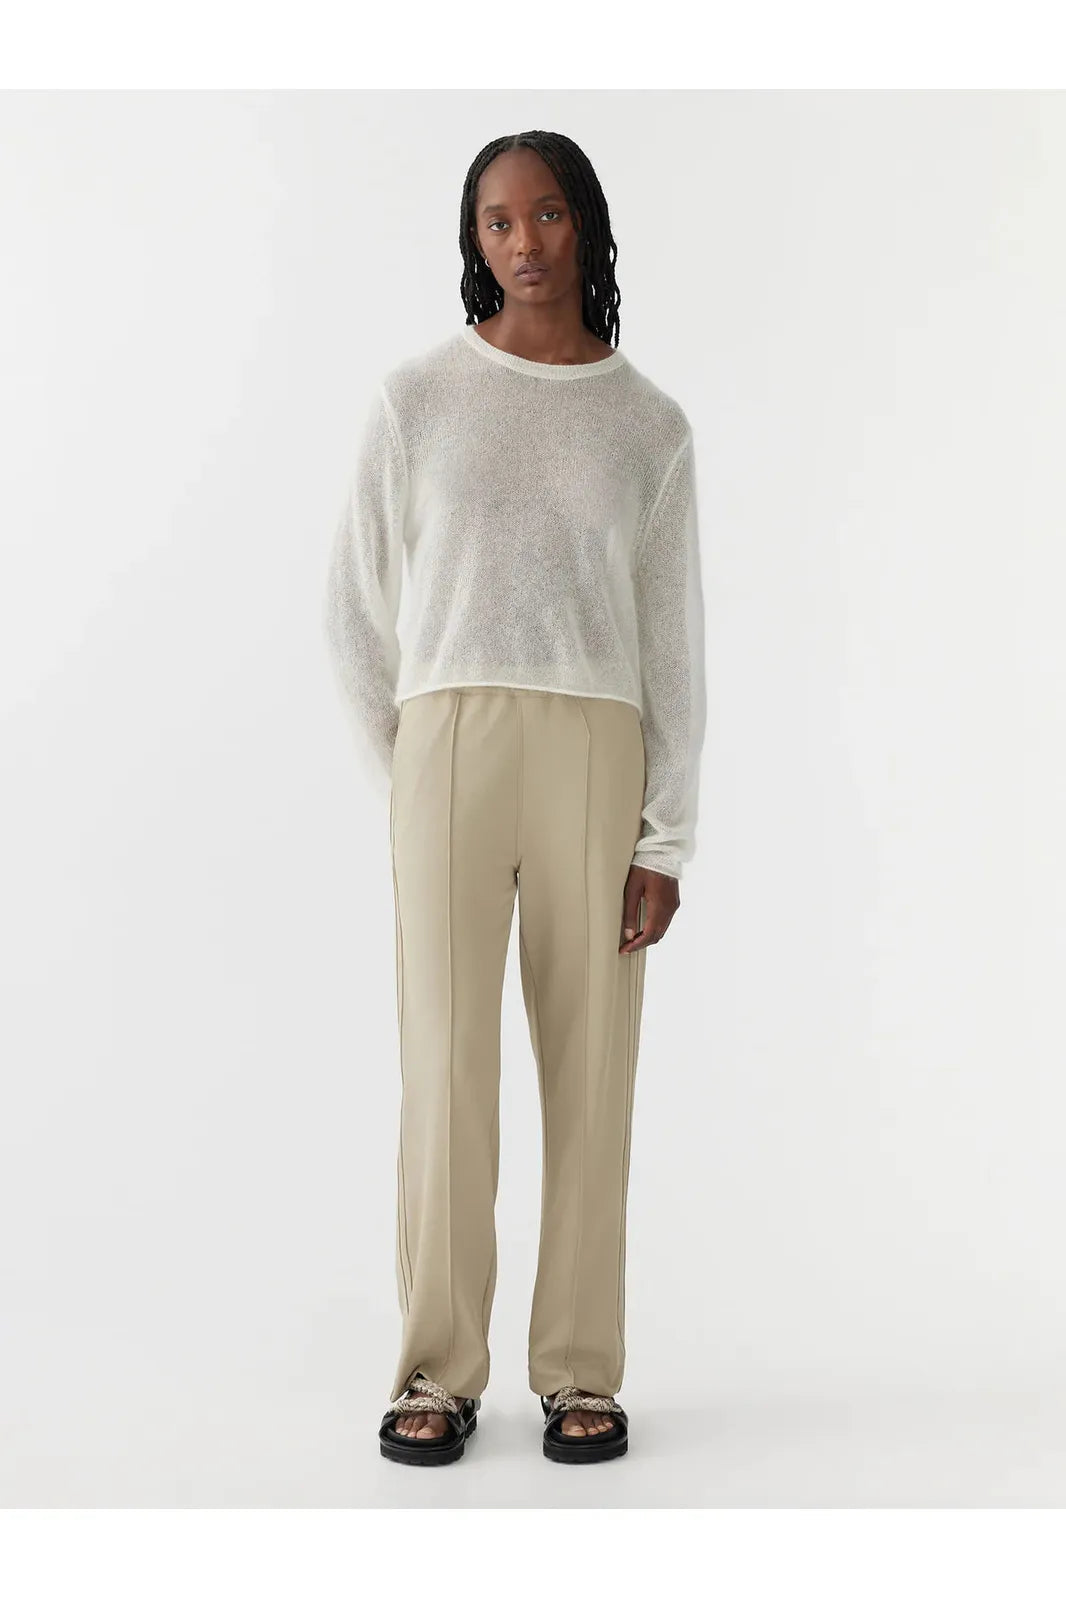 Twill Pinstitch Detail Pant in Light Tan by Bassike